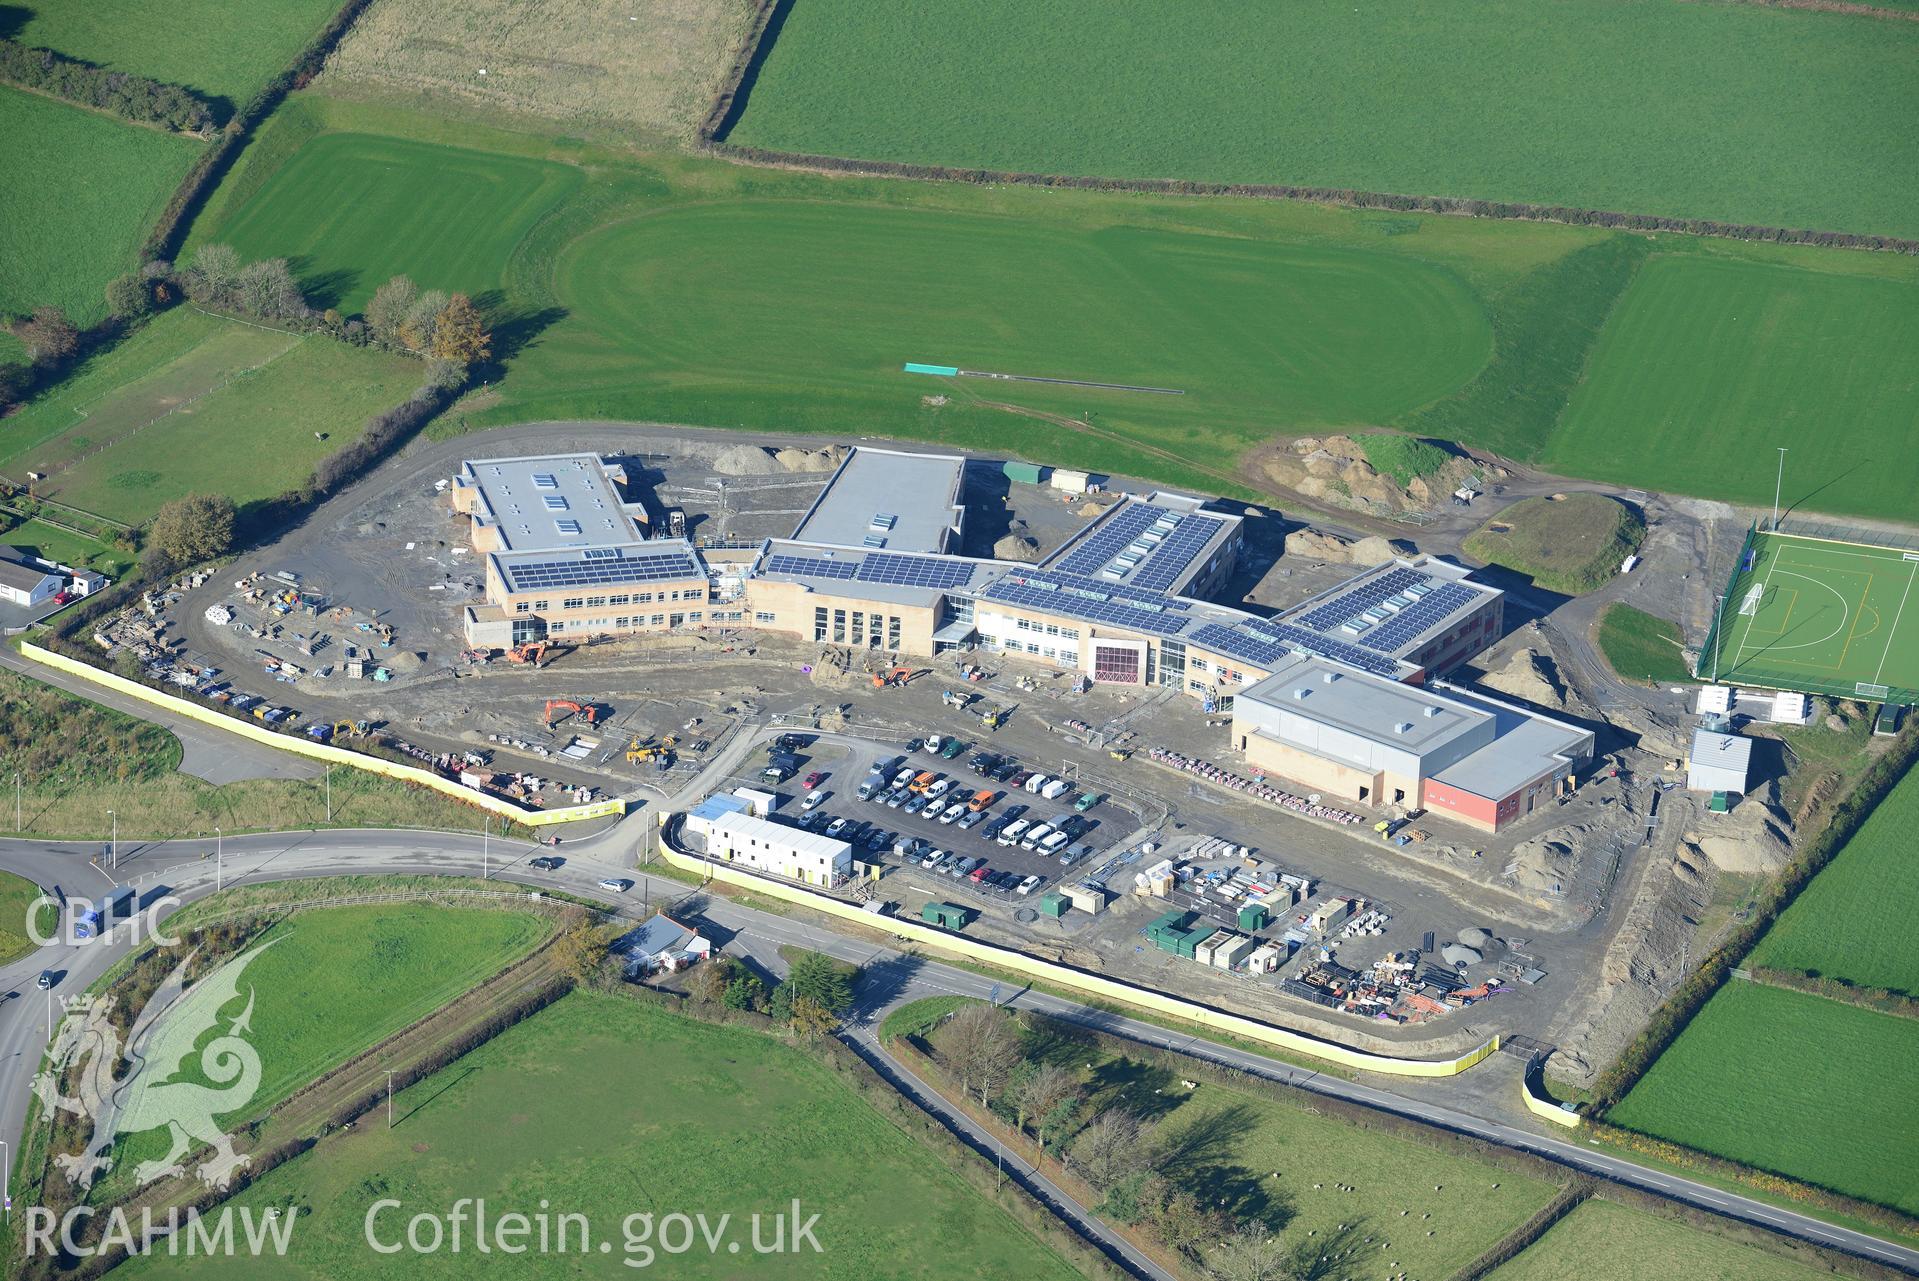 Ysgol Bro Teifi, Llandysul. Oblique aerial photograph taken during the Royal Commission's programme of archaeological aerial reconnaissance by Toby Driver on 2nd November 2015.